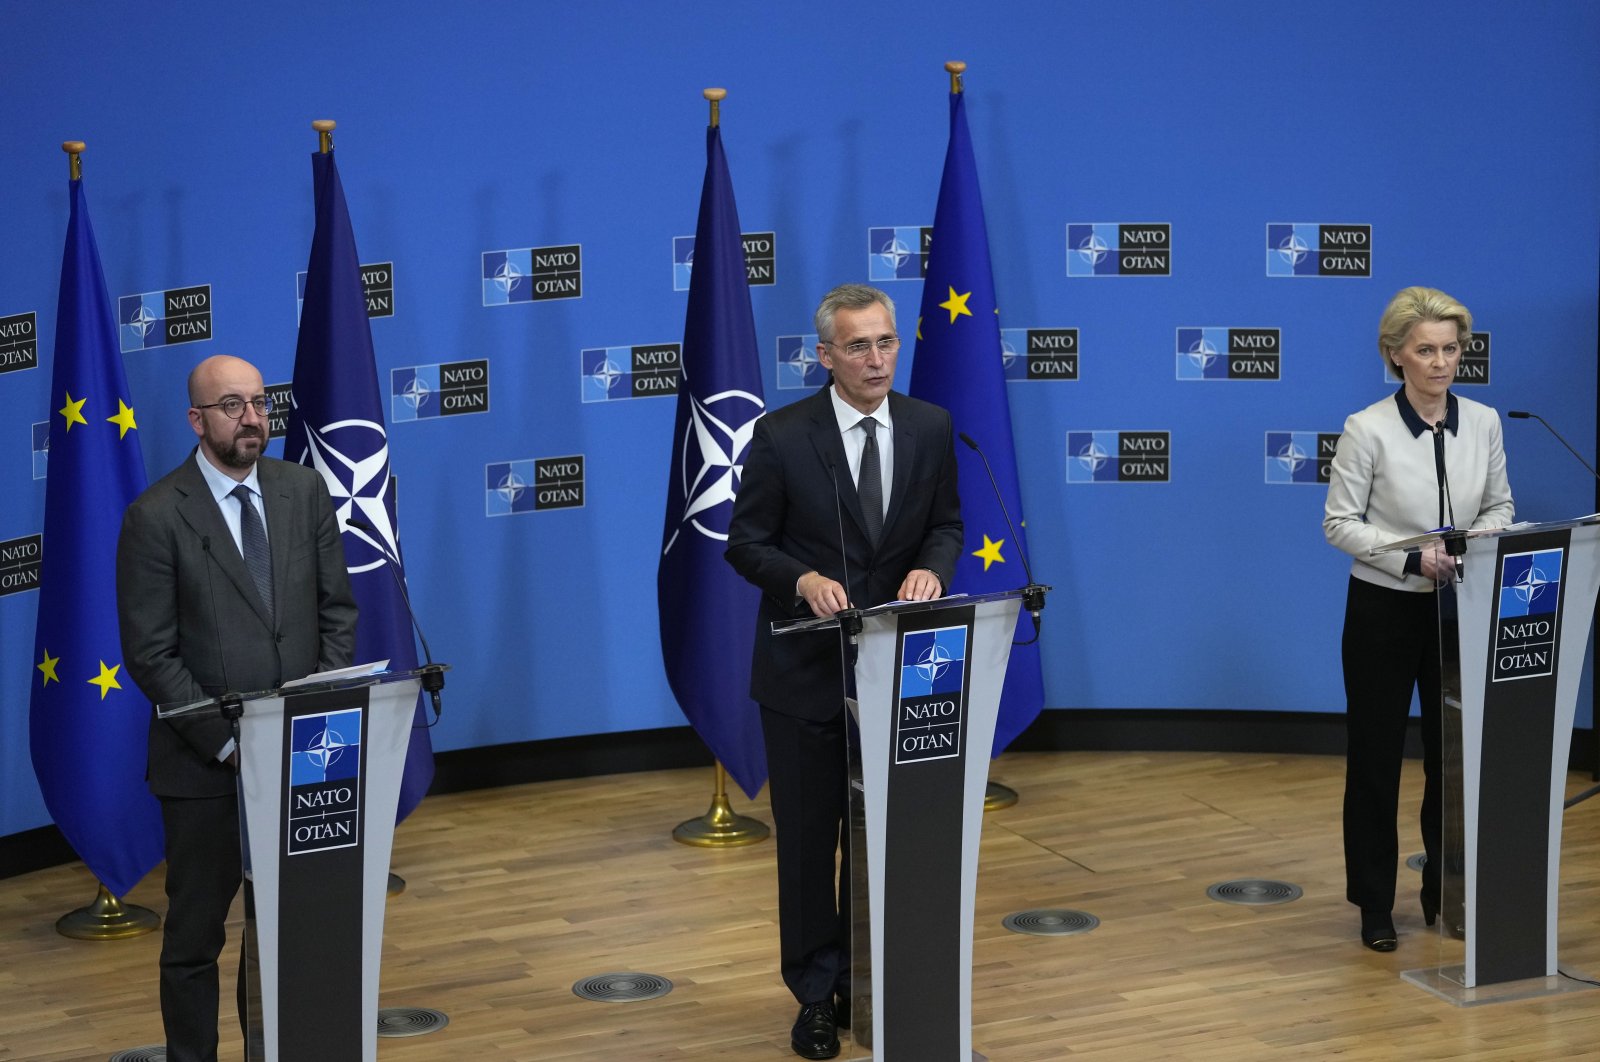 NATO Secretary-General Jens Stoltenberg (C) participates in a media conference with European Commission President Ursula von der Leyen (R) and European Council President Charles Michel at NATO headquarters in Brussels, Belgium, Feb 24, 2022. (AP Photo)